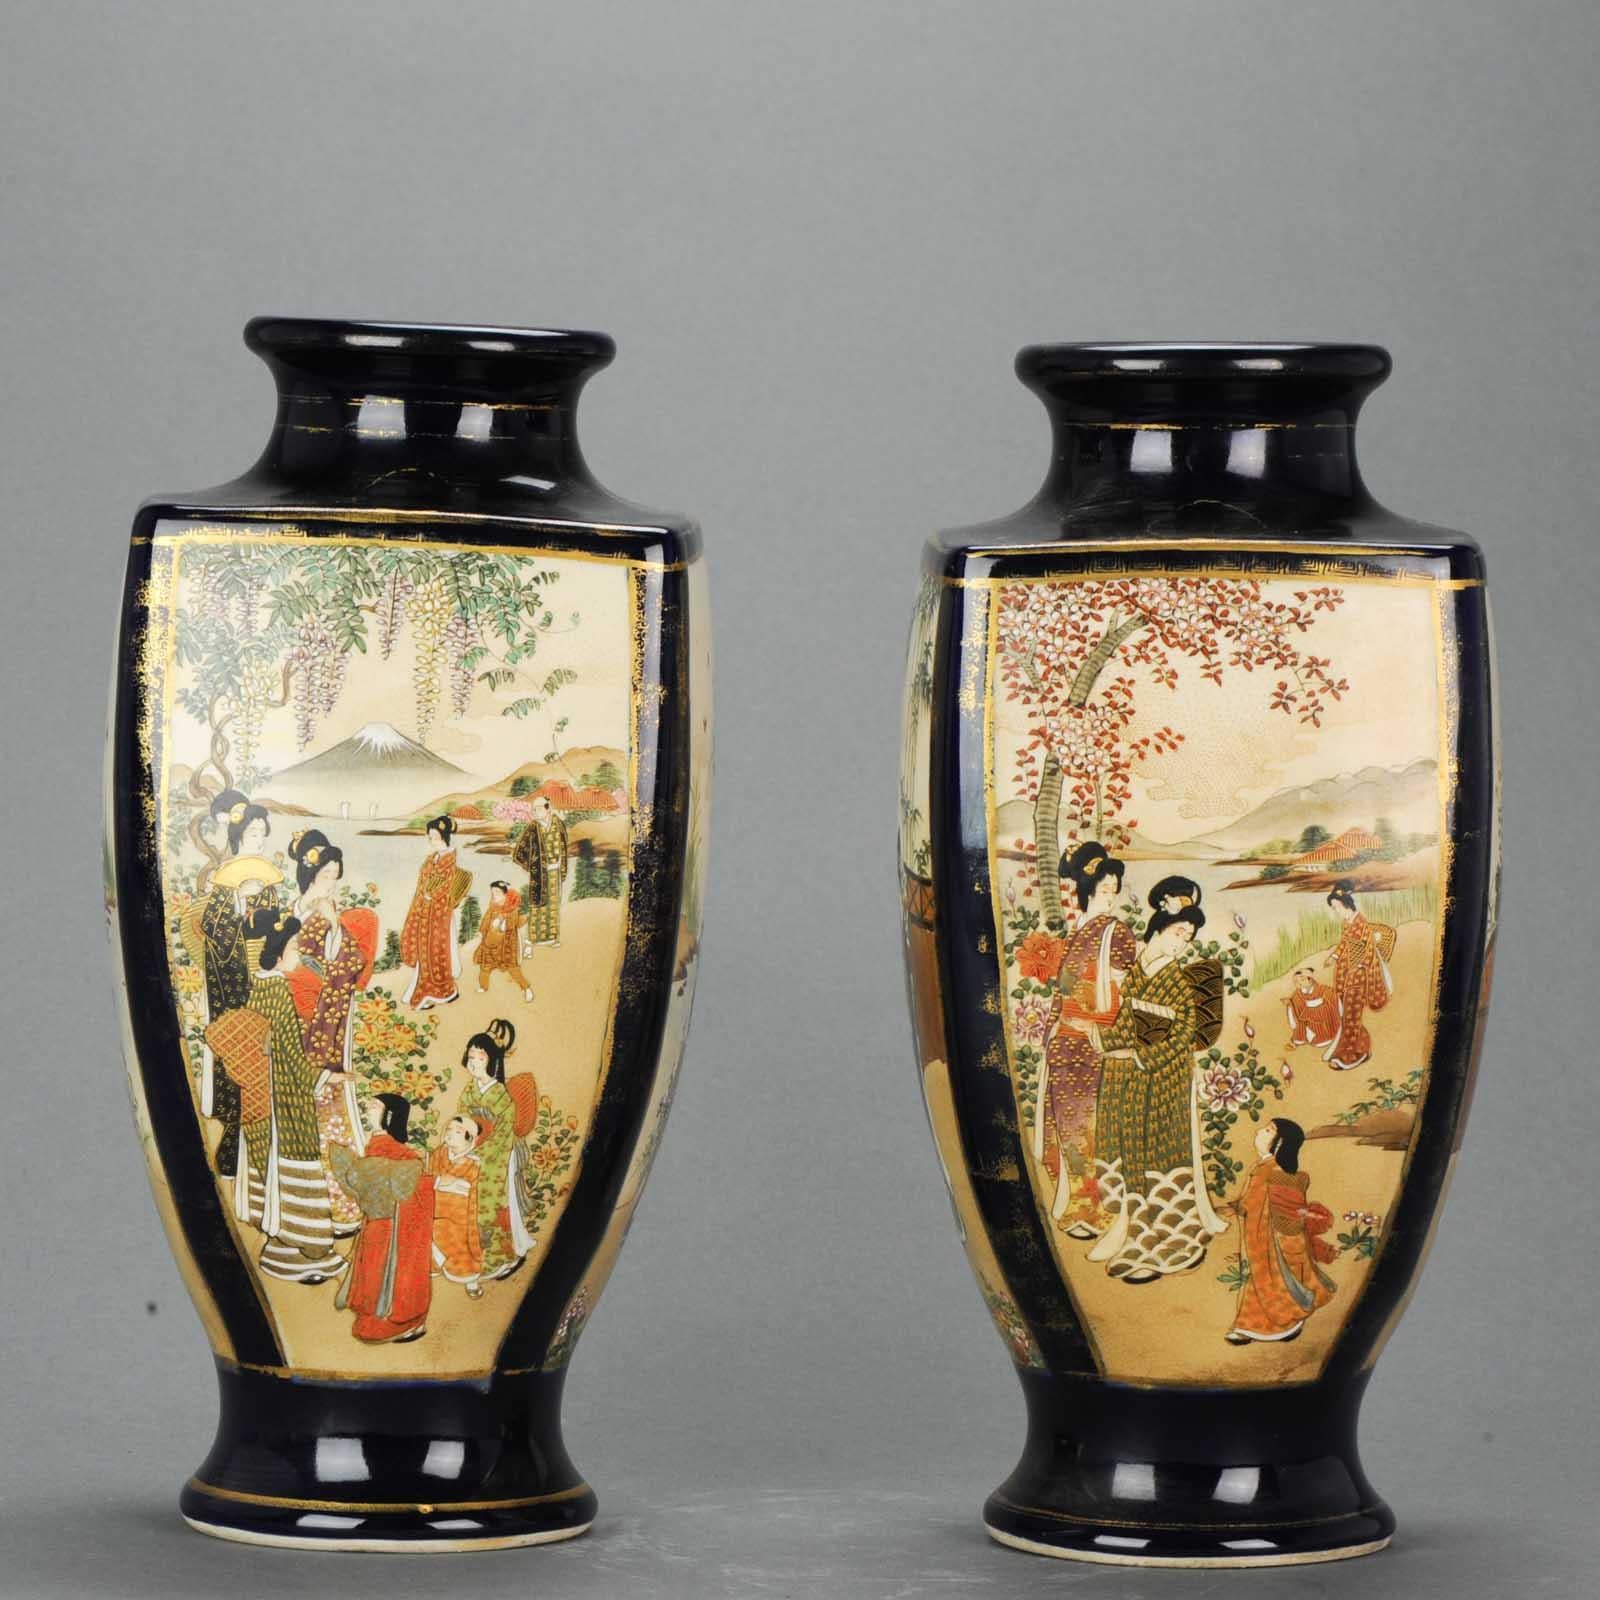 Earthenware Antique Early 20th Century Japanese Satsuma Vase Warriors Figures Decorated For Sale